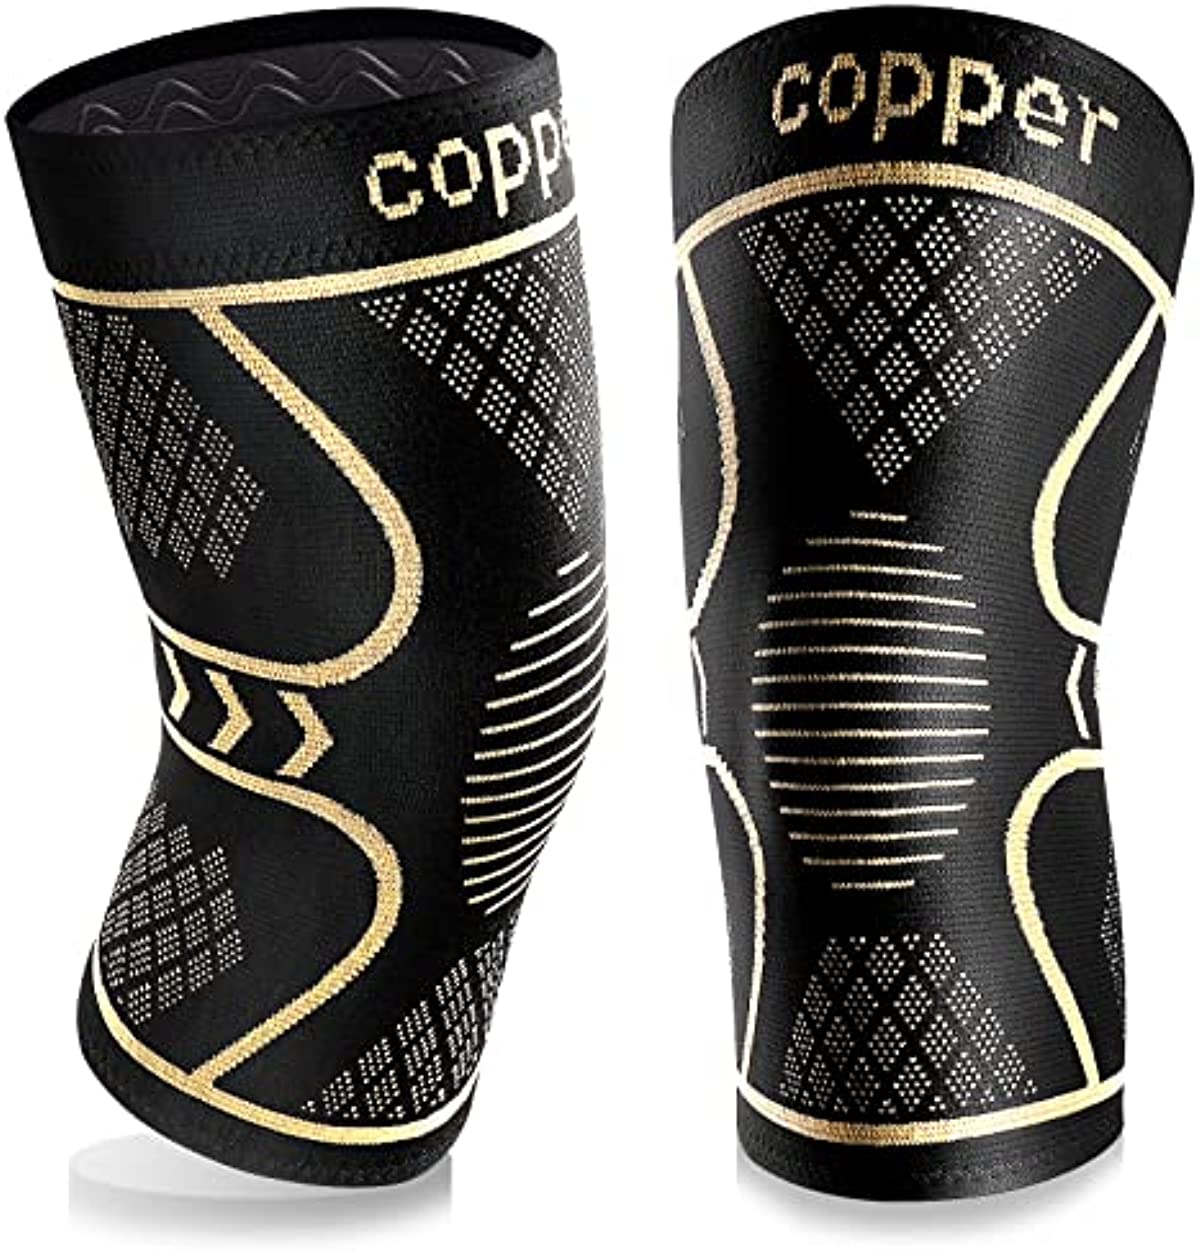 Copper Knee Braces for Knee Pain 2 Pack, Knee Compression Sleeve Support for Men and Women, Medical Grade Knee Pads for Running, Hiking, Working, Arthritis, ACL, Meniscus Tear, Joint Pain Relief